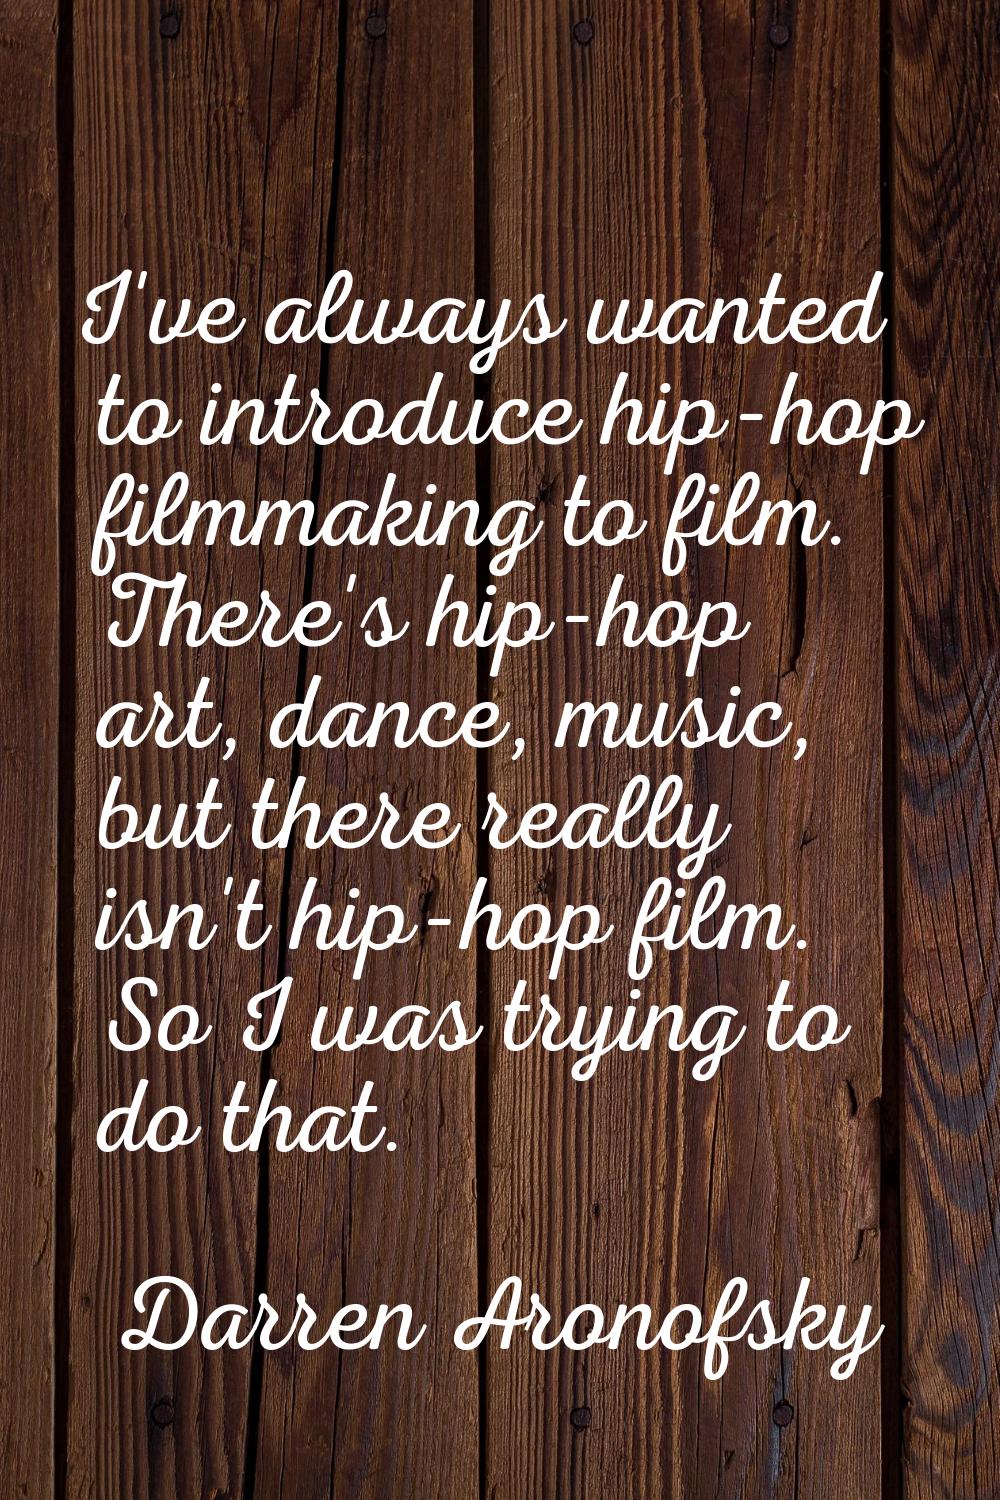 I've always wanted to introduce hip-hop filmmaking to film. There's hip-hop art, dance, music, but 